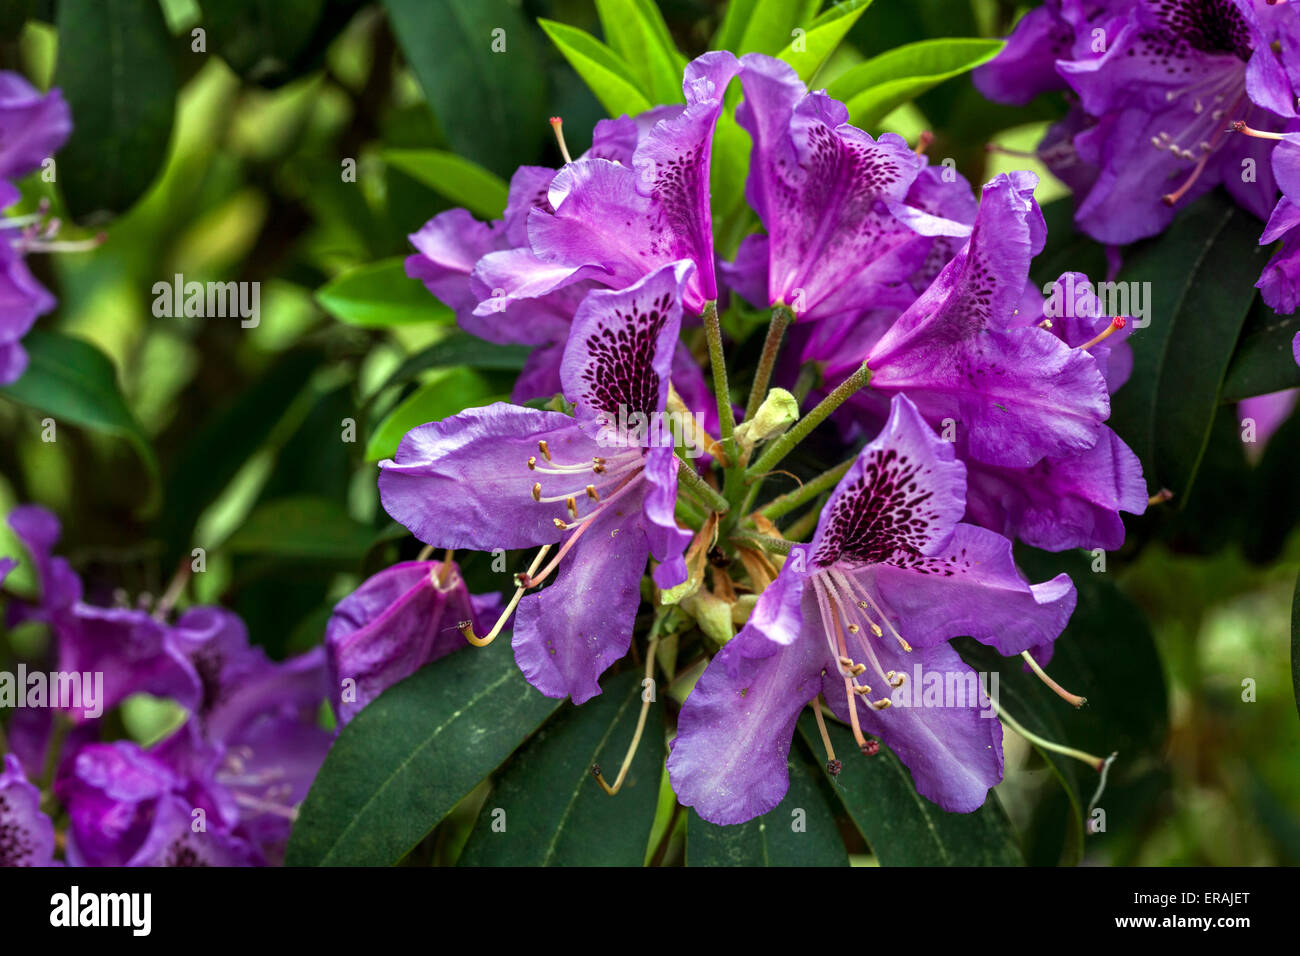 Rhododendron Blutopia in bloom Stock Photo